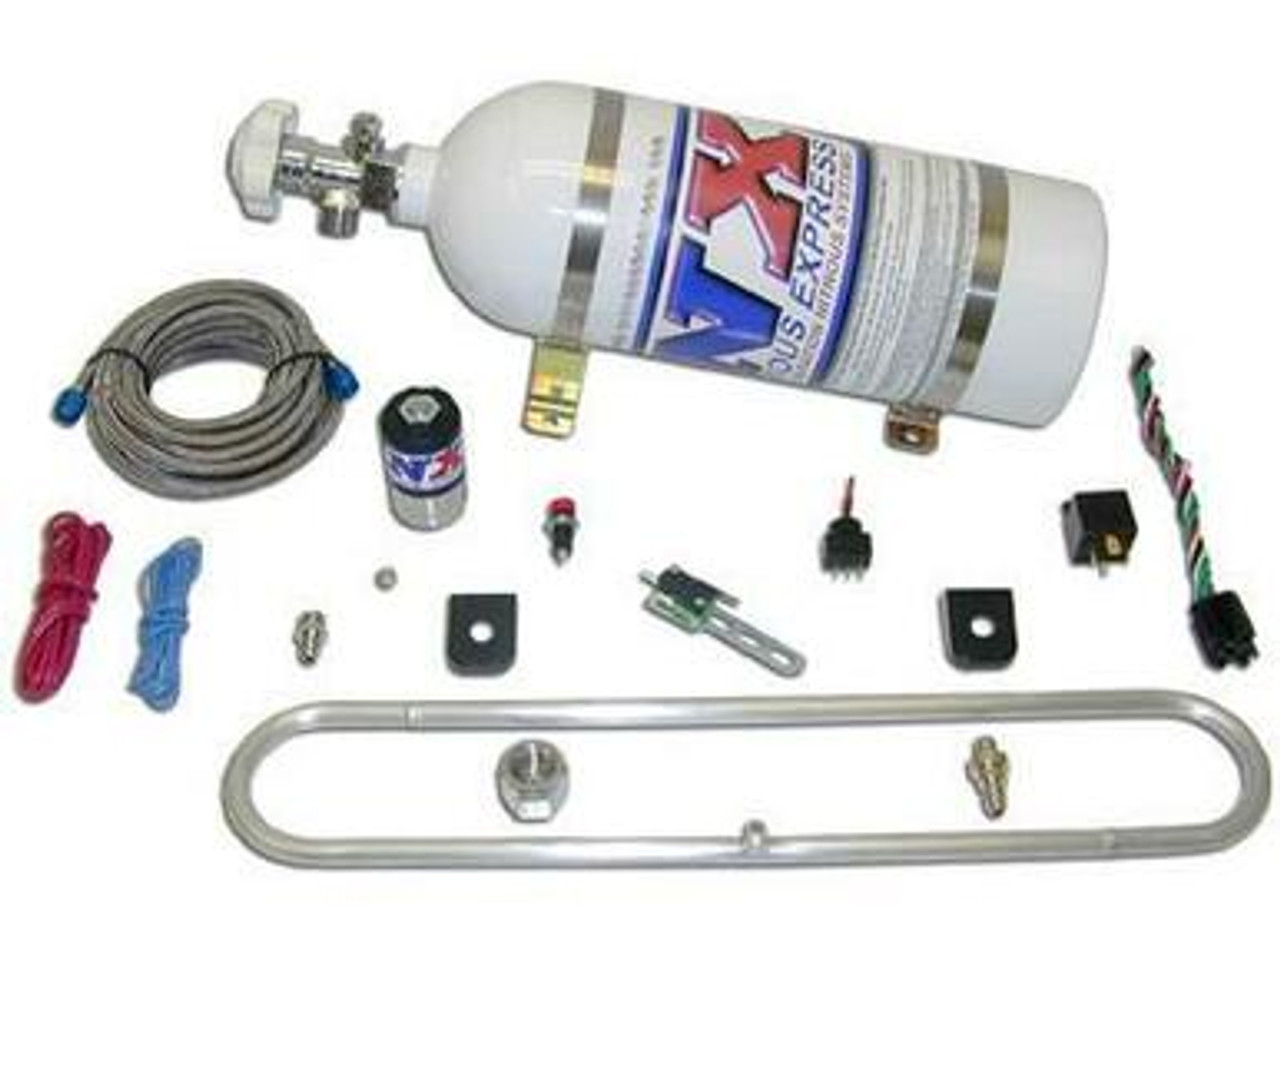 Nitrous Express N-terCooler System with 10 lb bottle